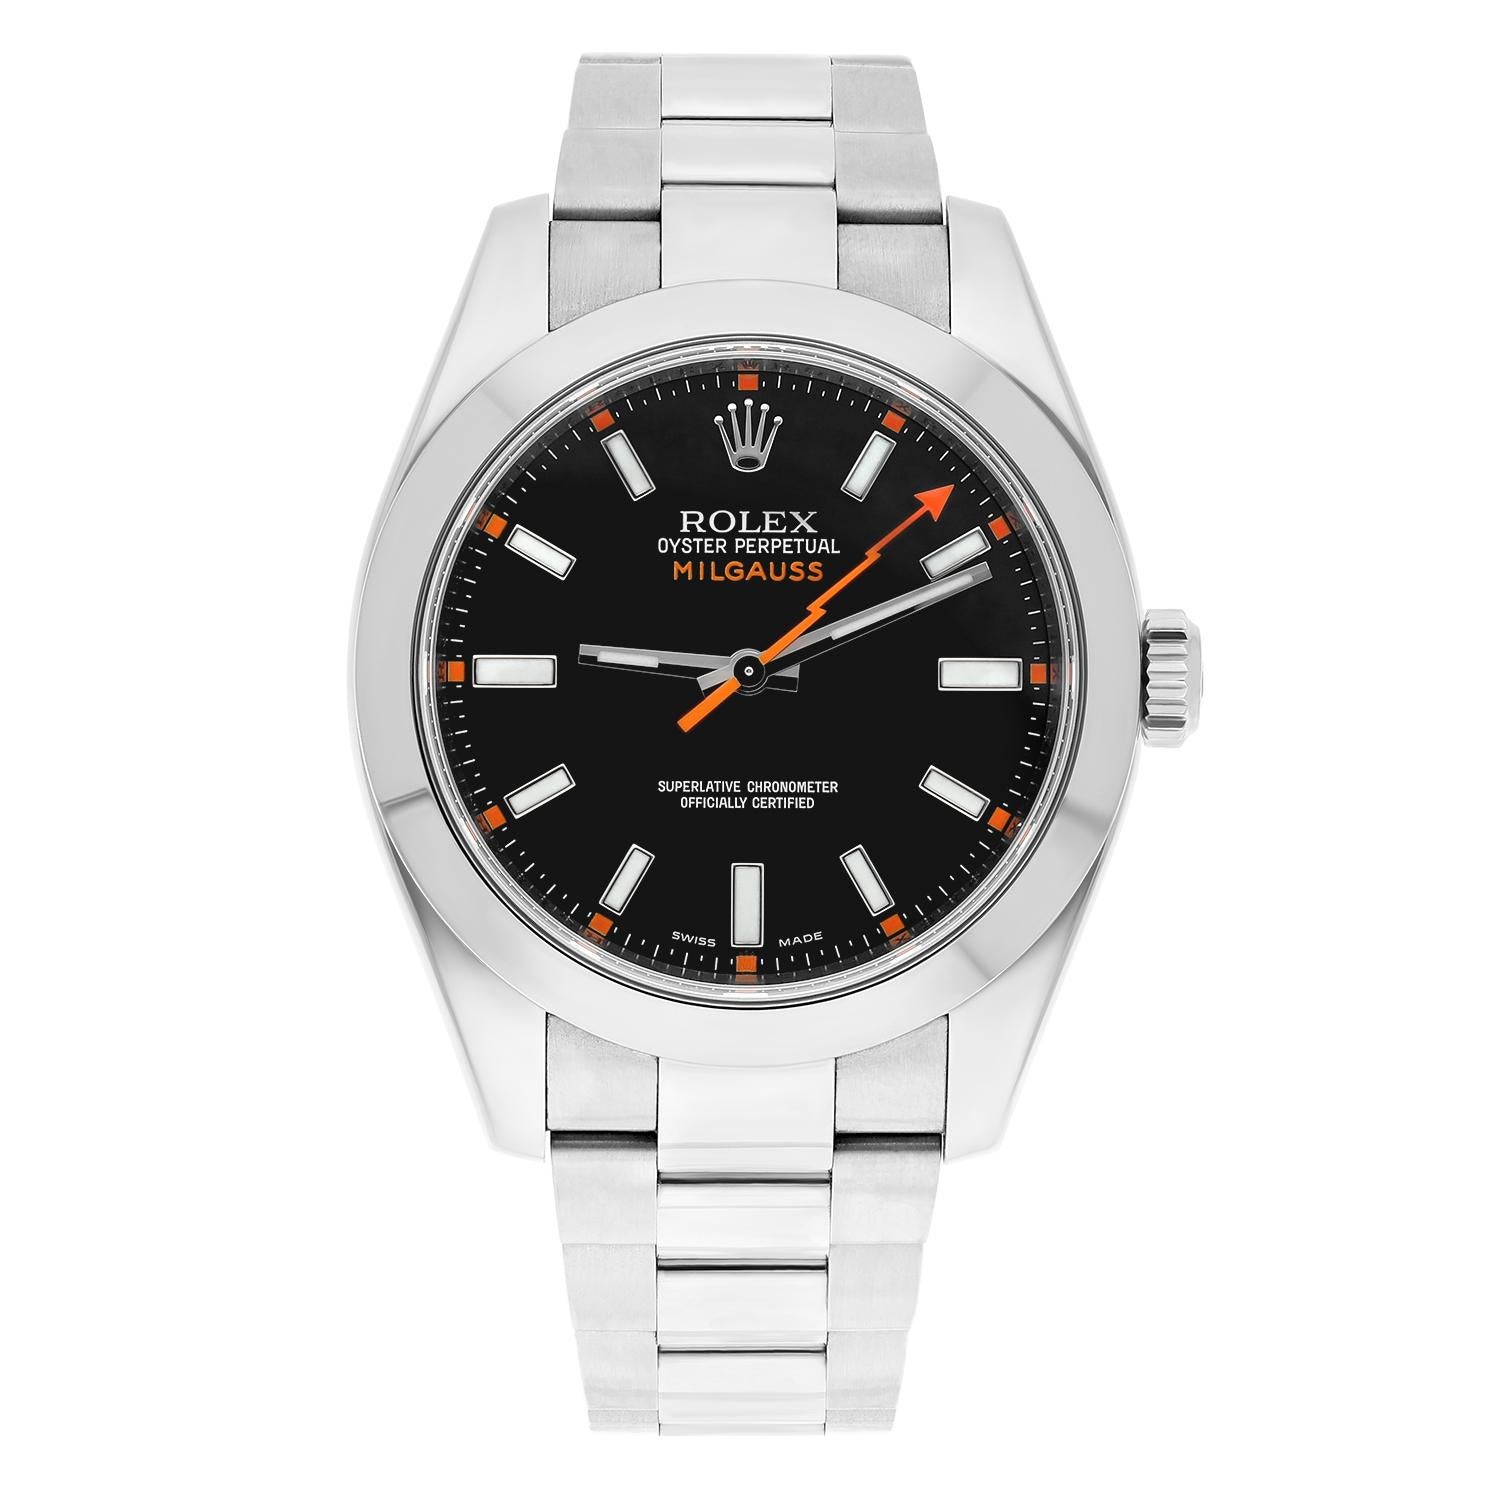 This watch has been professionally polished, serviced and is in excellent overall condition. There are absolutely no visible scratches or blemishes. Model features quick-set movement. Authenticity guaranteed! The sale comes with a Rolex box, papers,